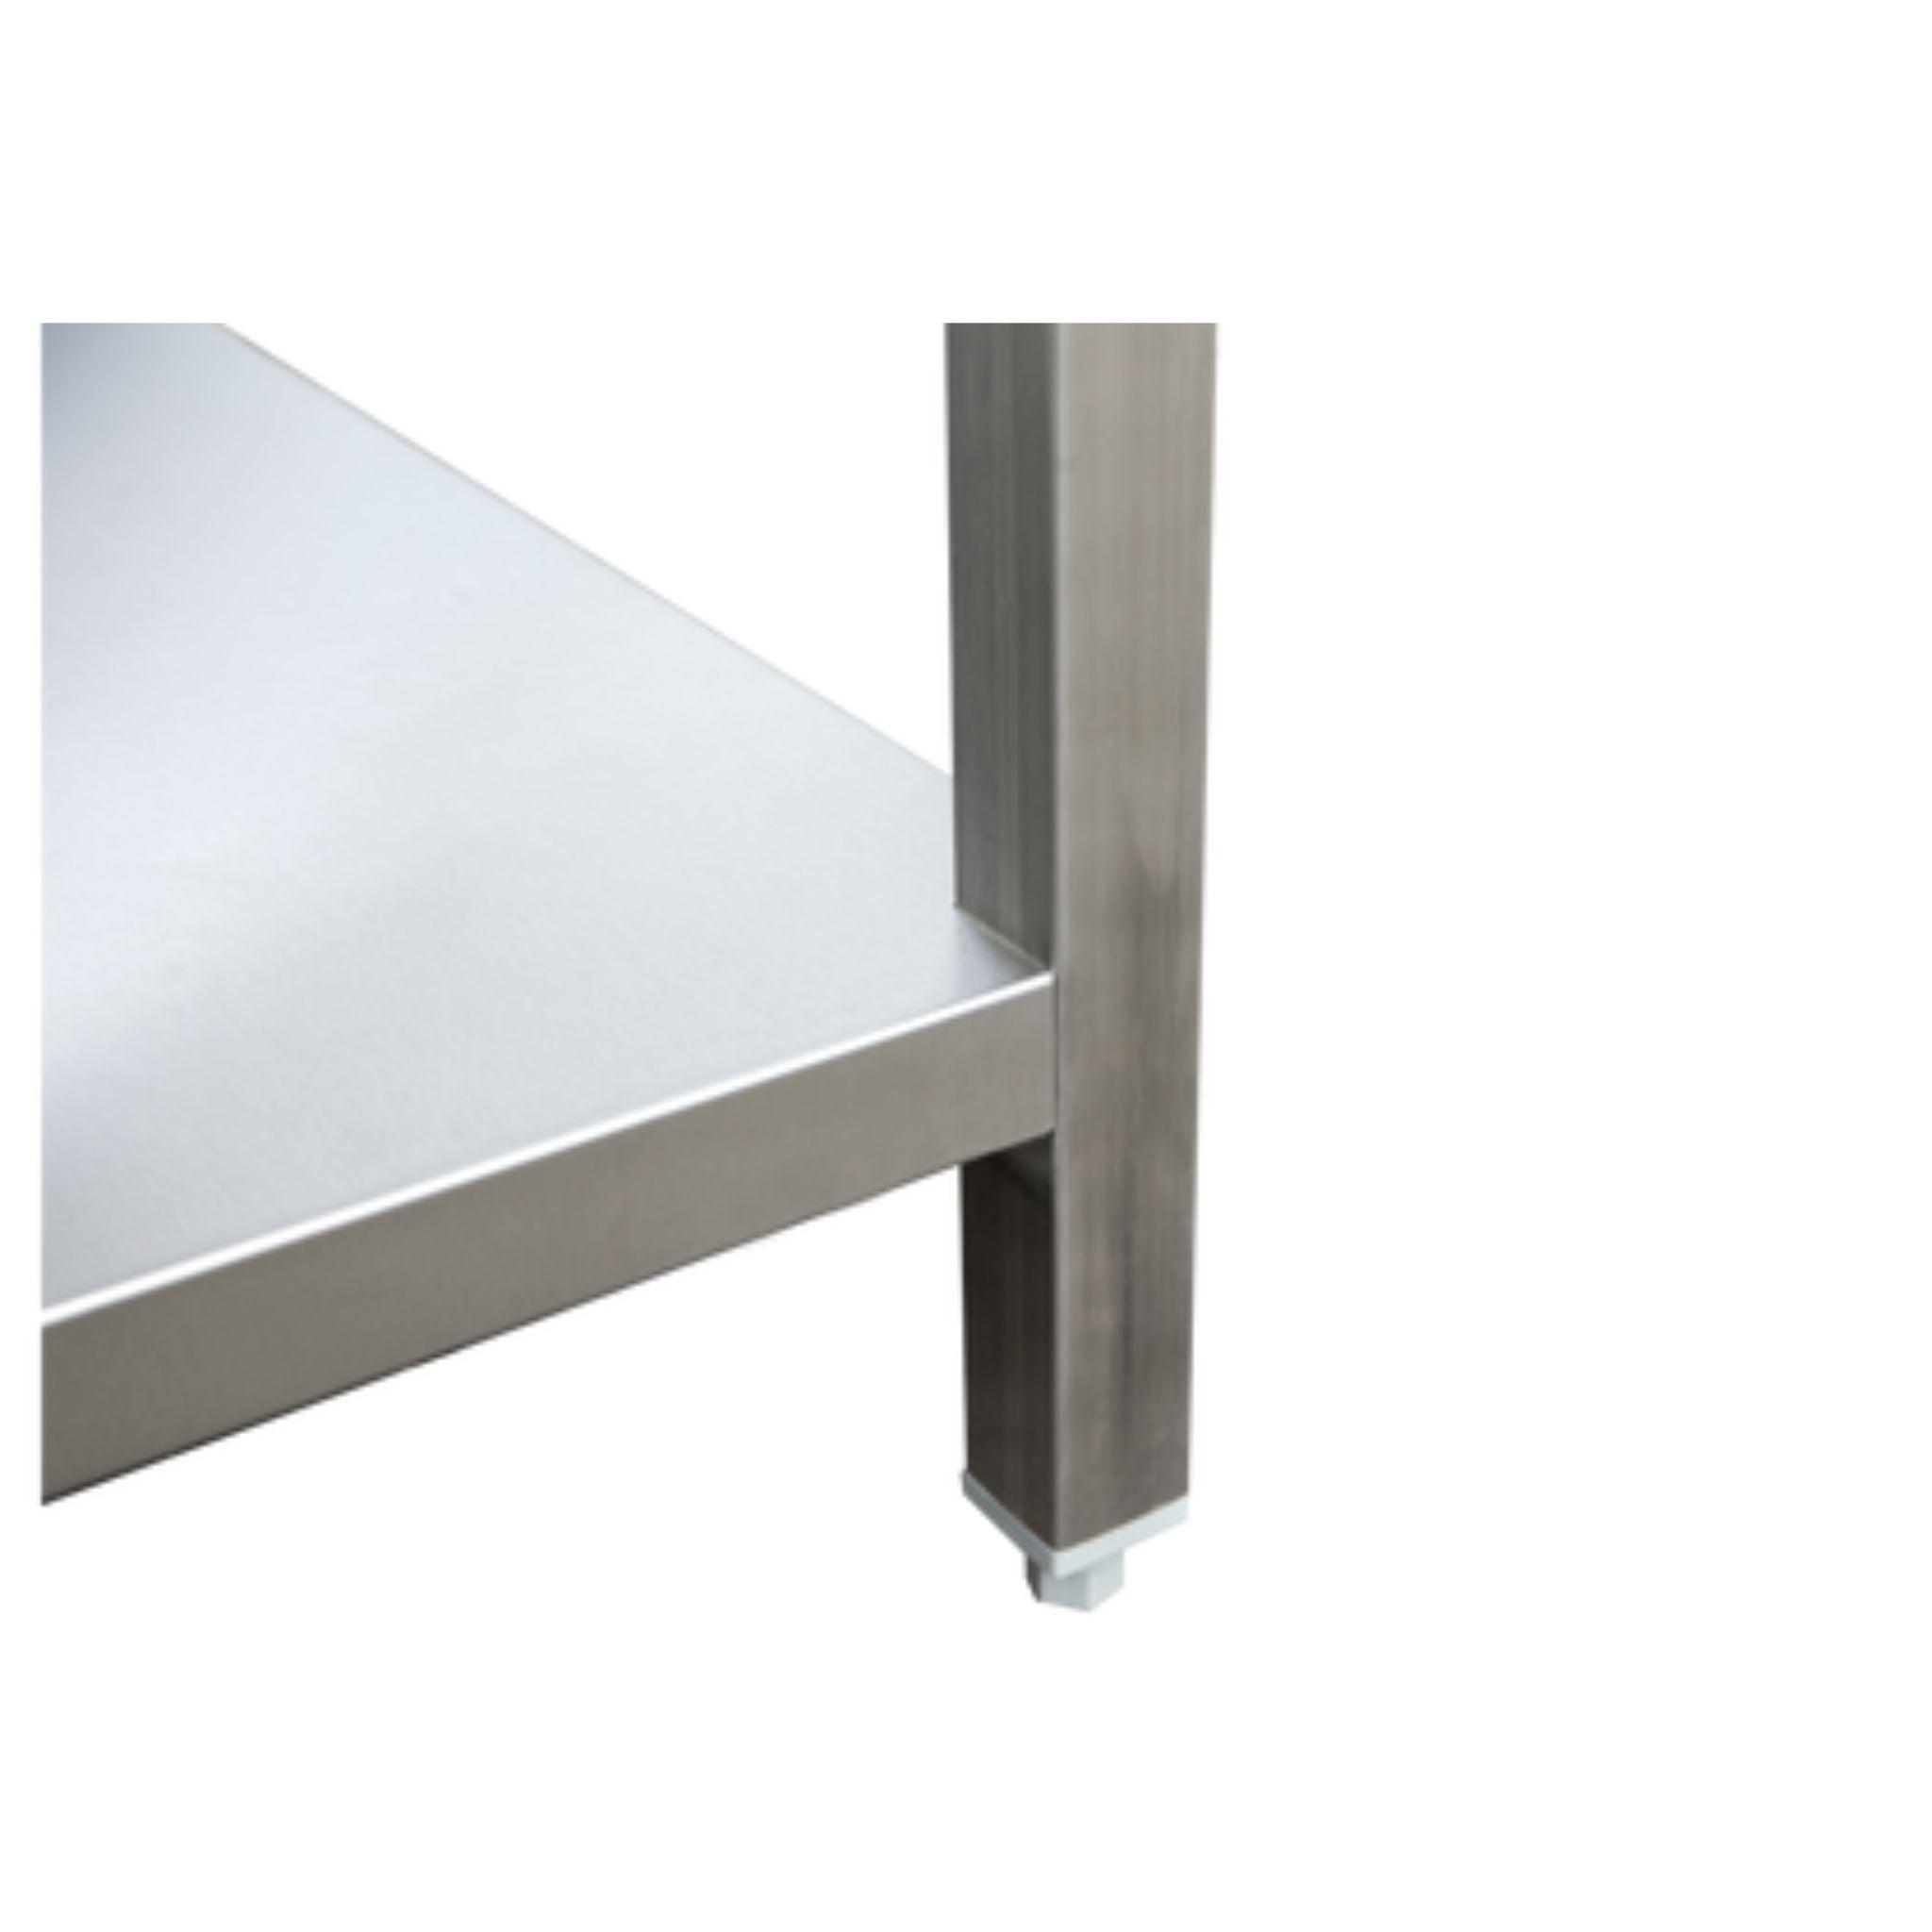 Professional stainless steel worktable with base and upstand